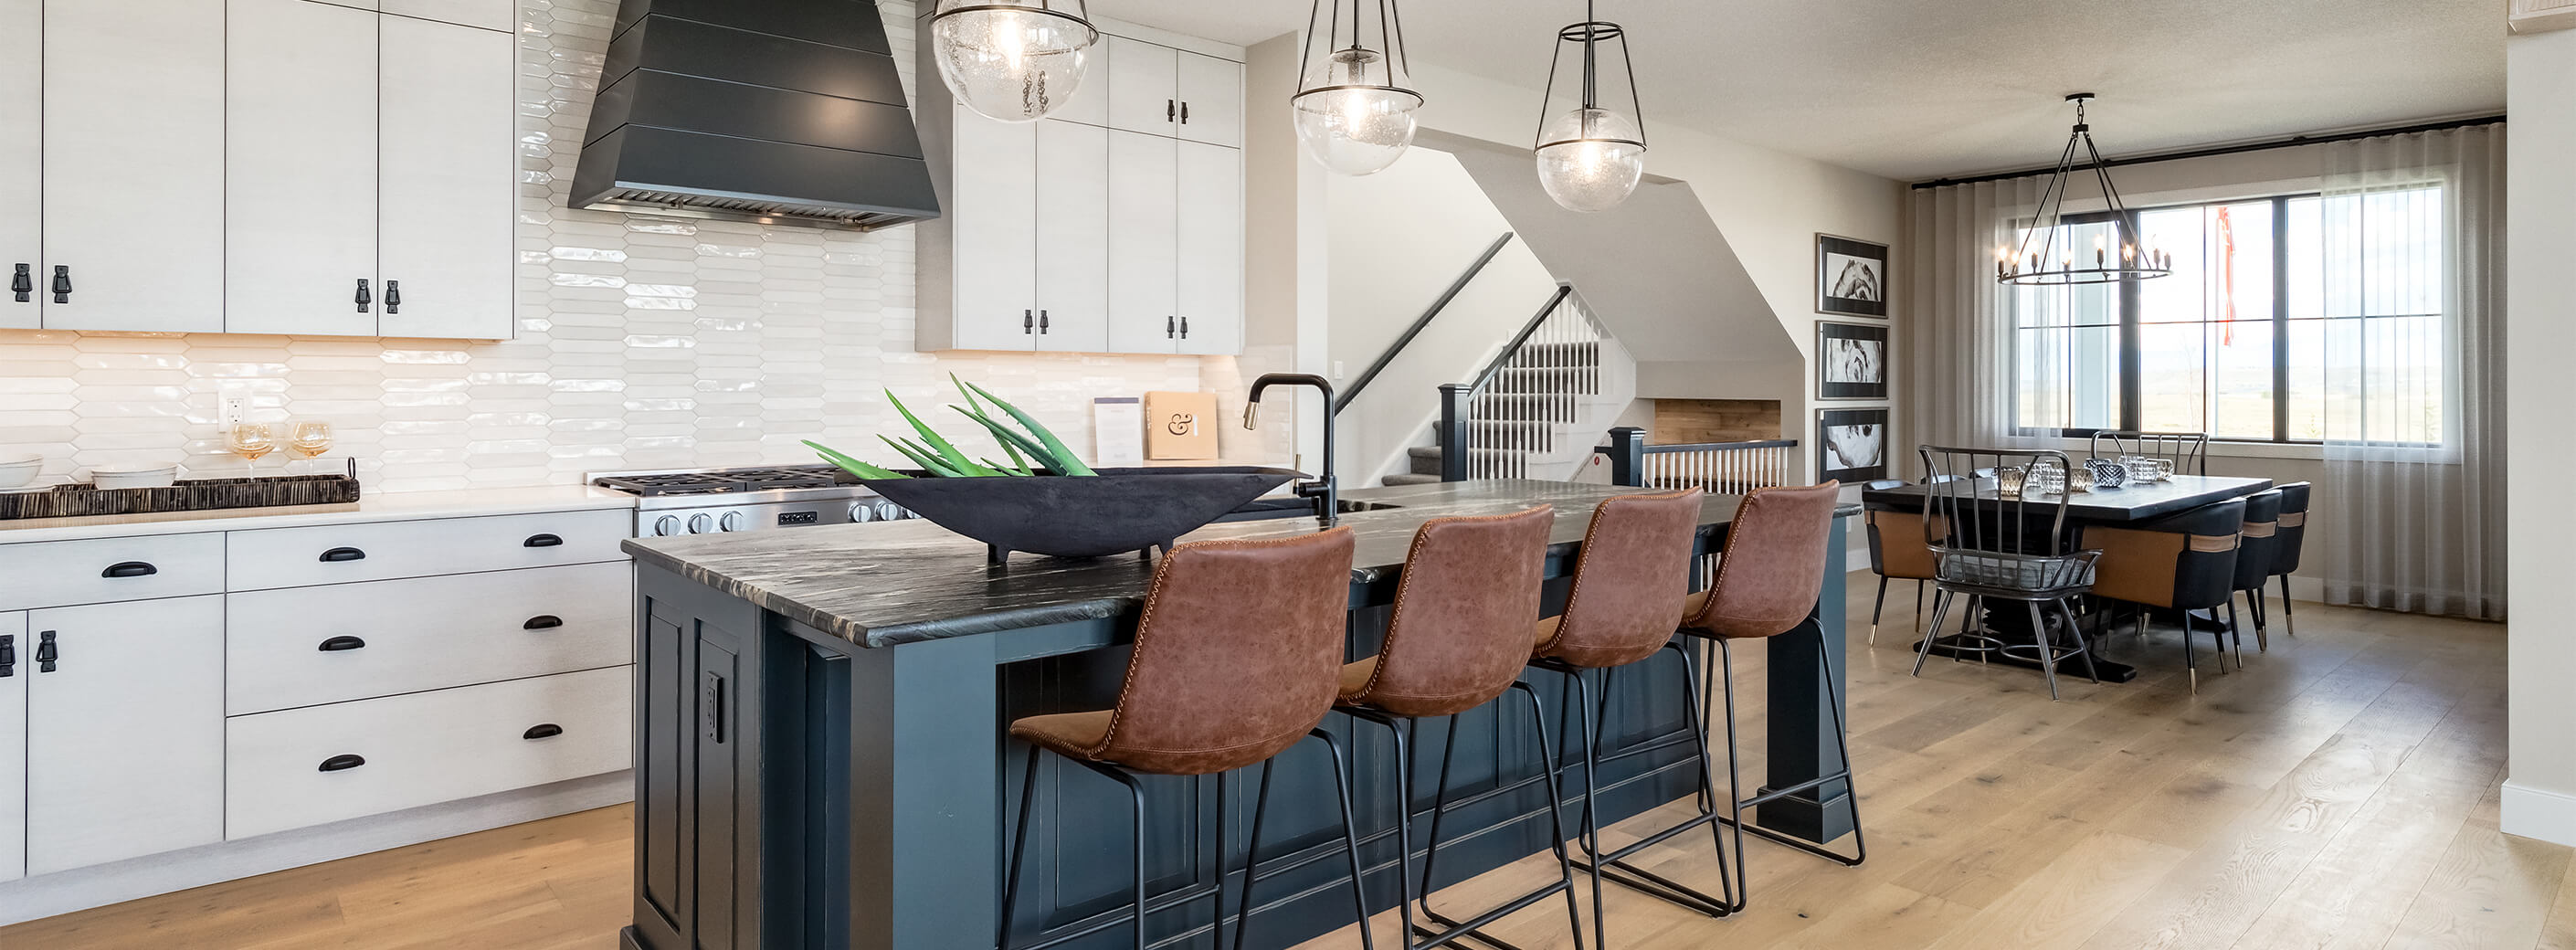 Kitchen of Show Home for Harmony Estate Homes